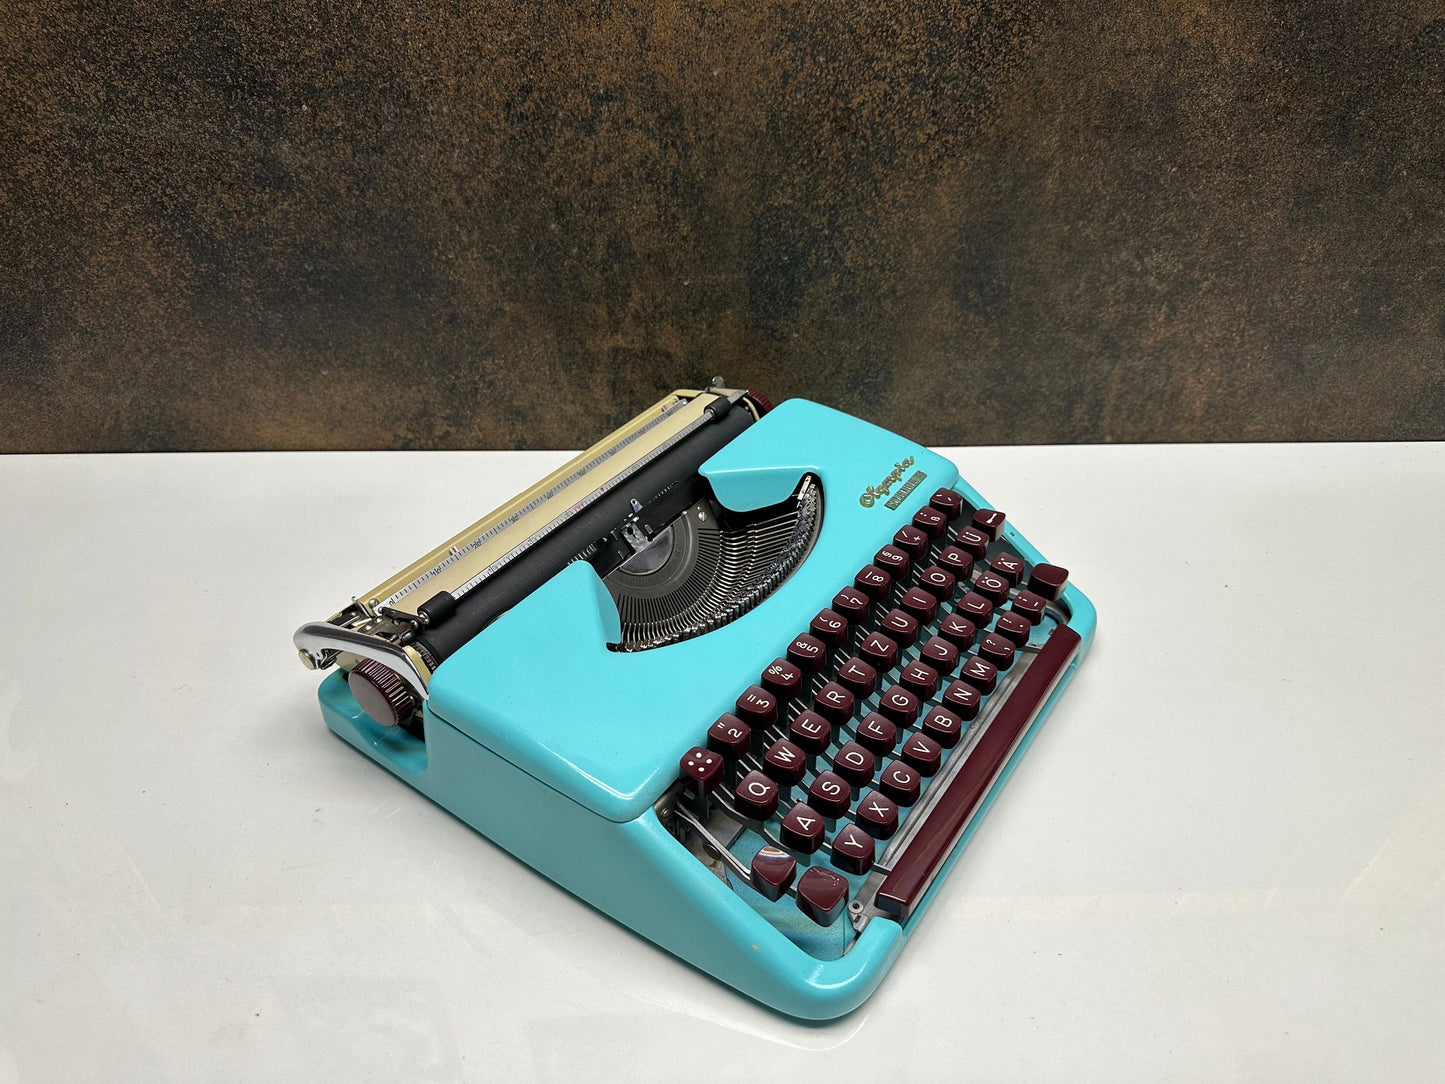 Antique Olympia Splendid 33/66 Turquoise Typewriter with Matching Case and Burgundy Keys | Rare Mechanical Keyboard for Writers and Collecto